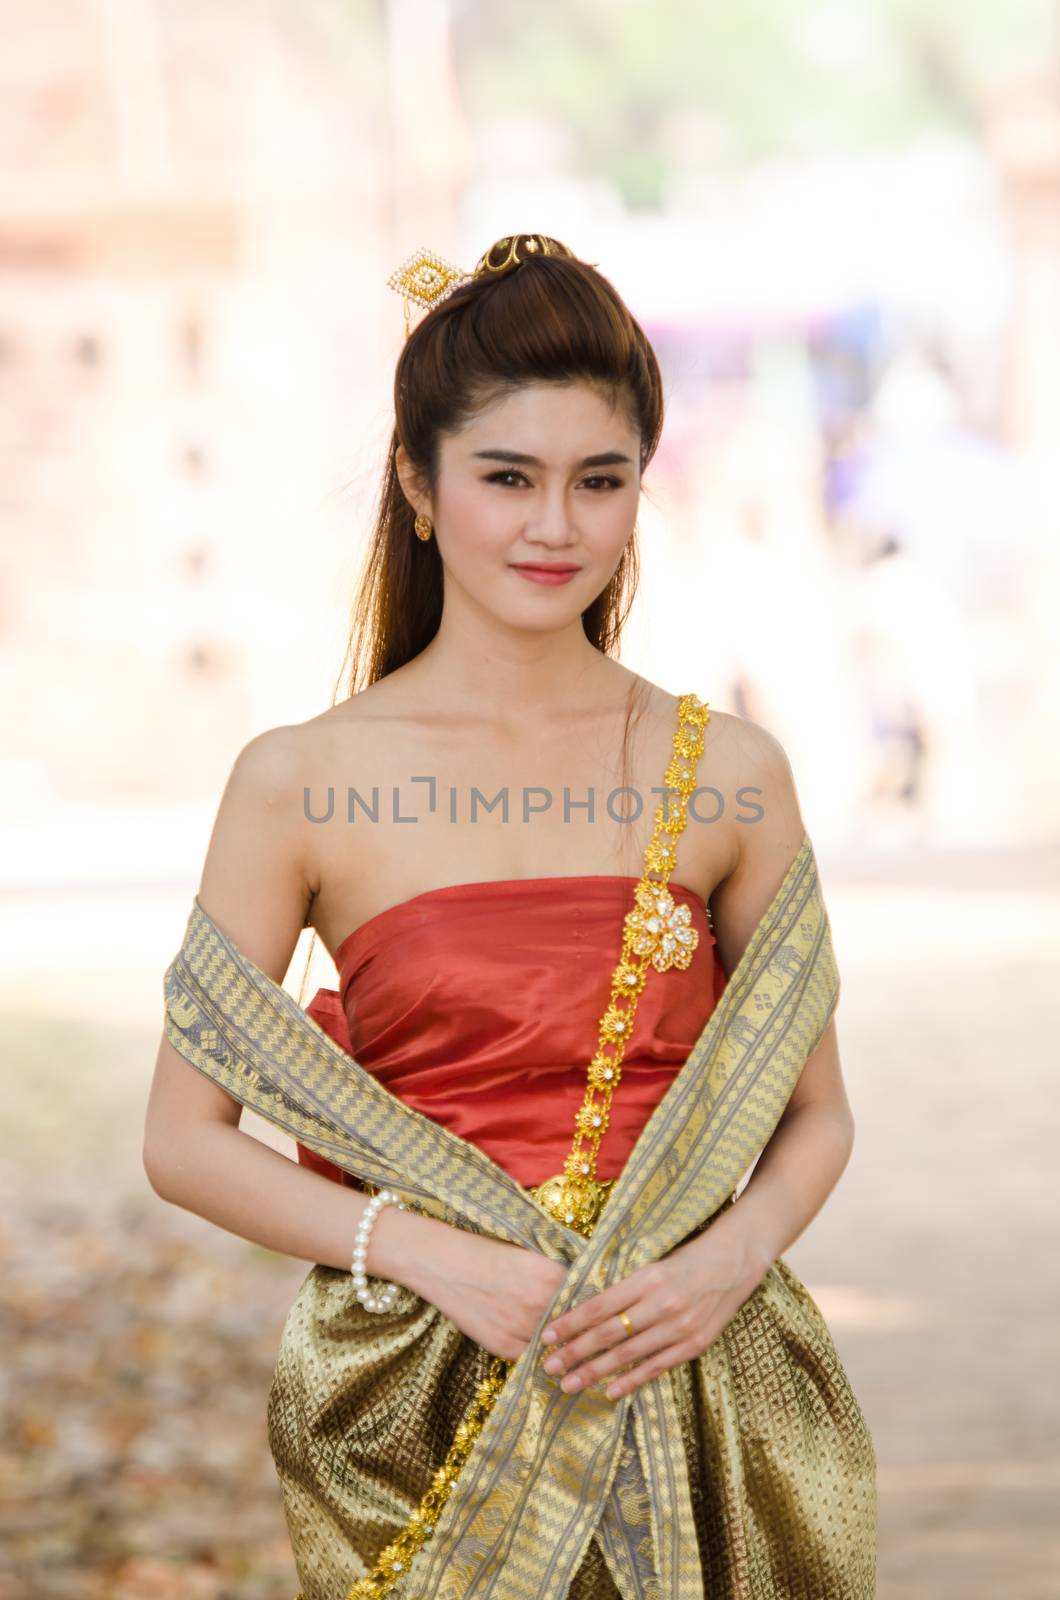 Thai woman dressing traditional. Wearing on important Day, New Year's Day/ Culture traditional Day